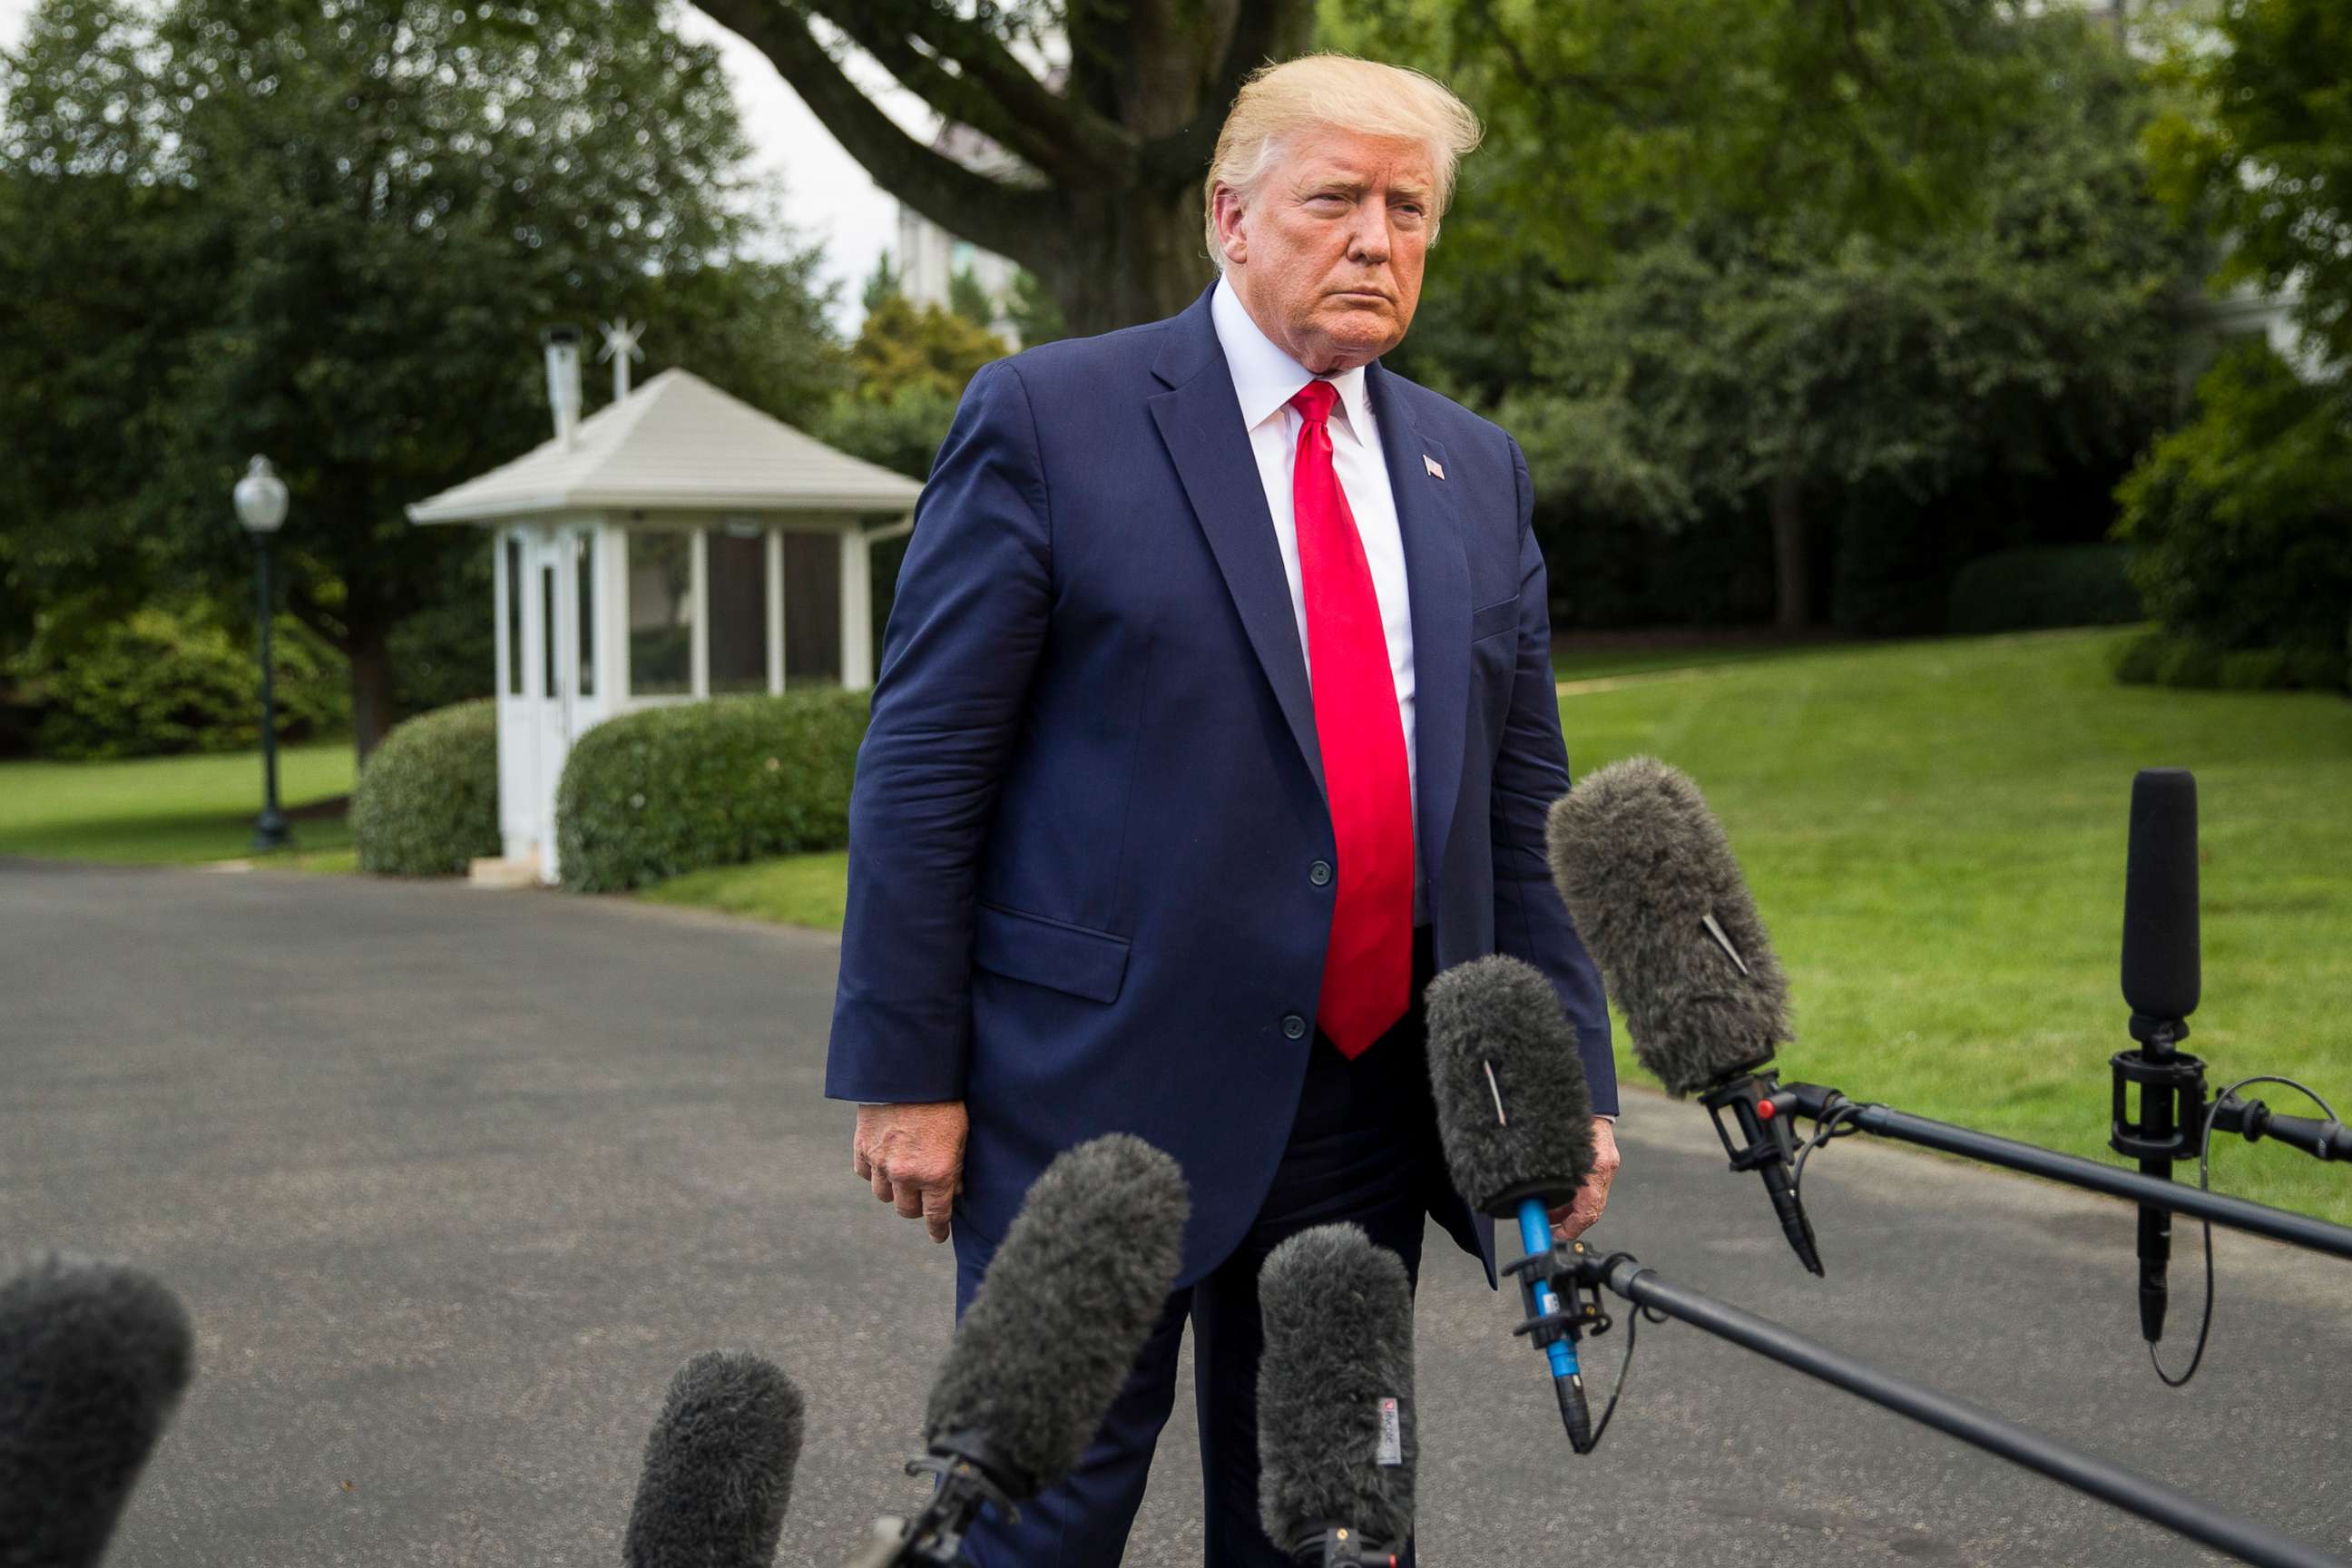 PHOTO: President Donald Trump listens to a question as he speaks with reporters on the South Lawn of the White House before departing, July 17, 2019, in Washington.